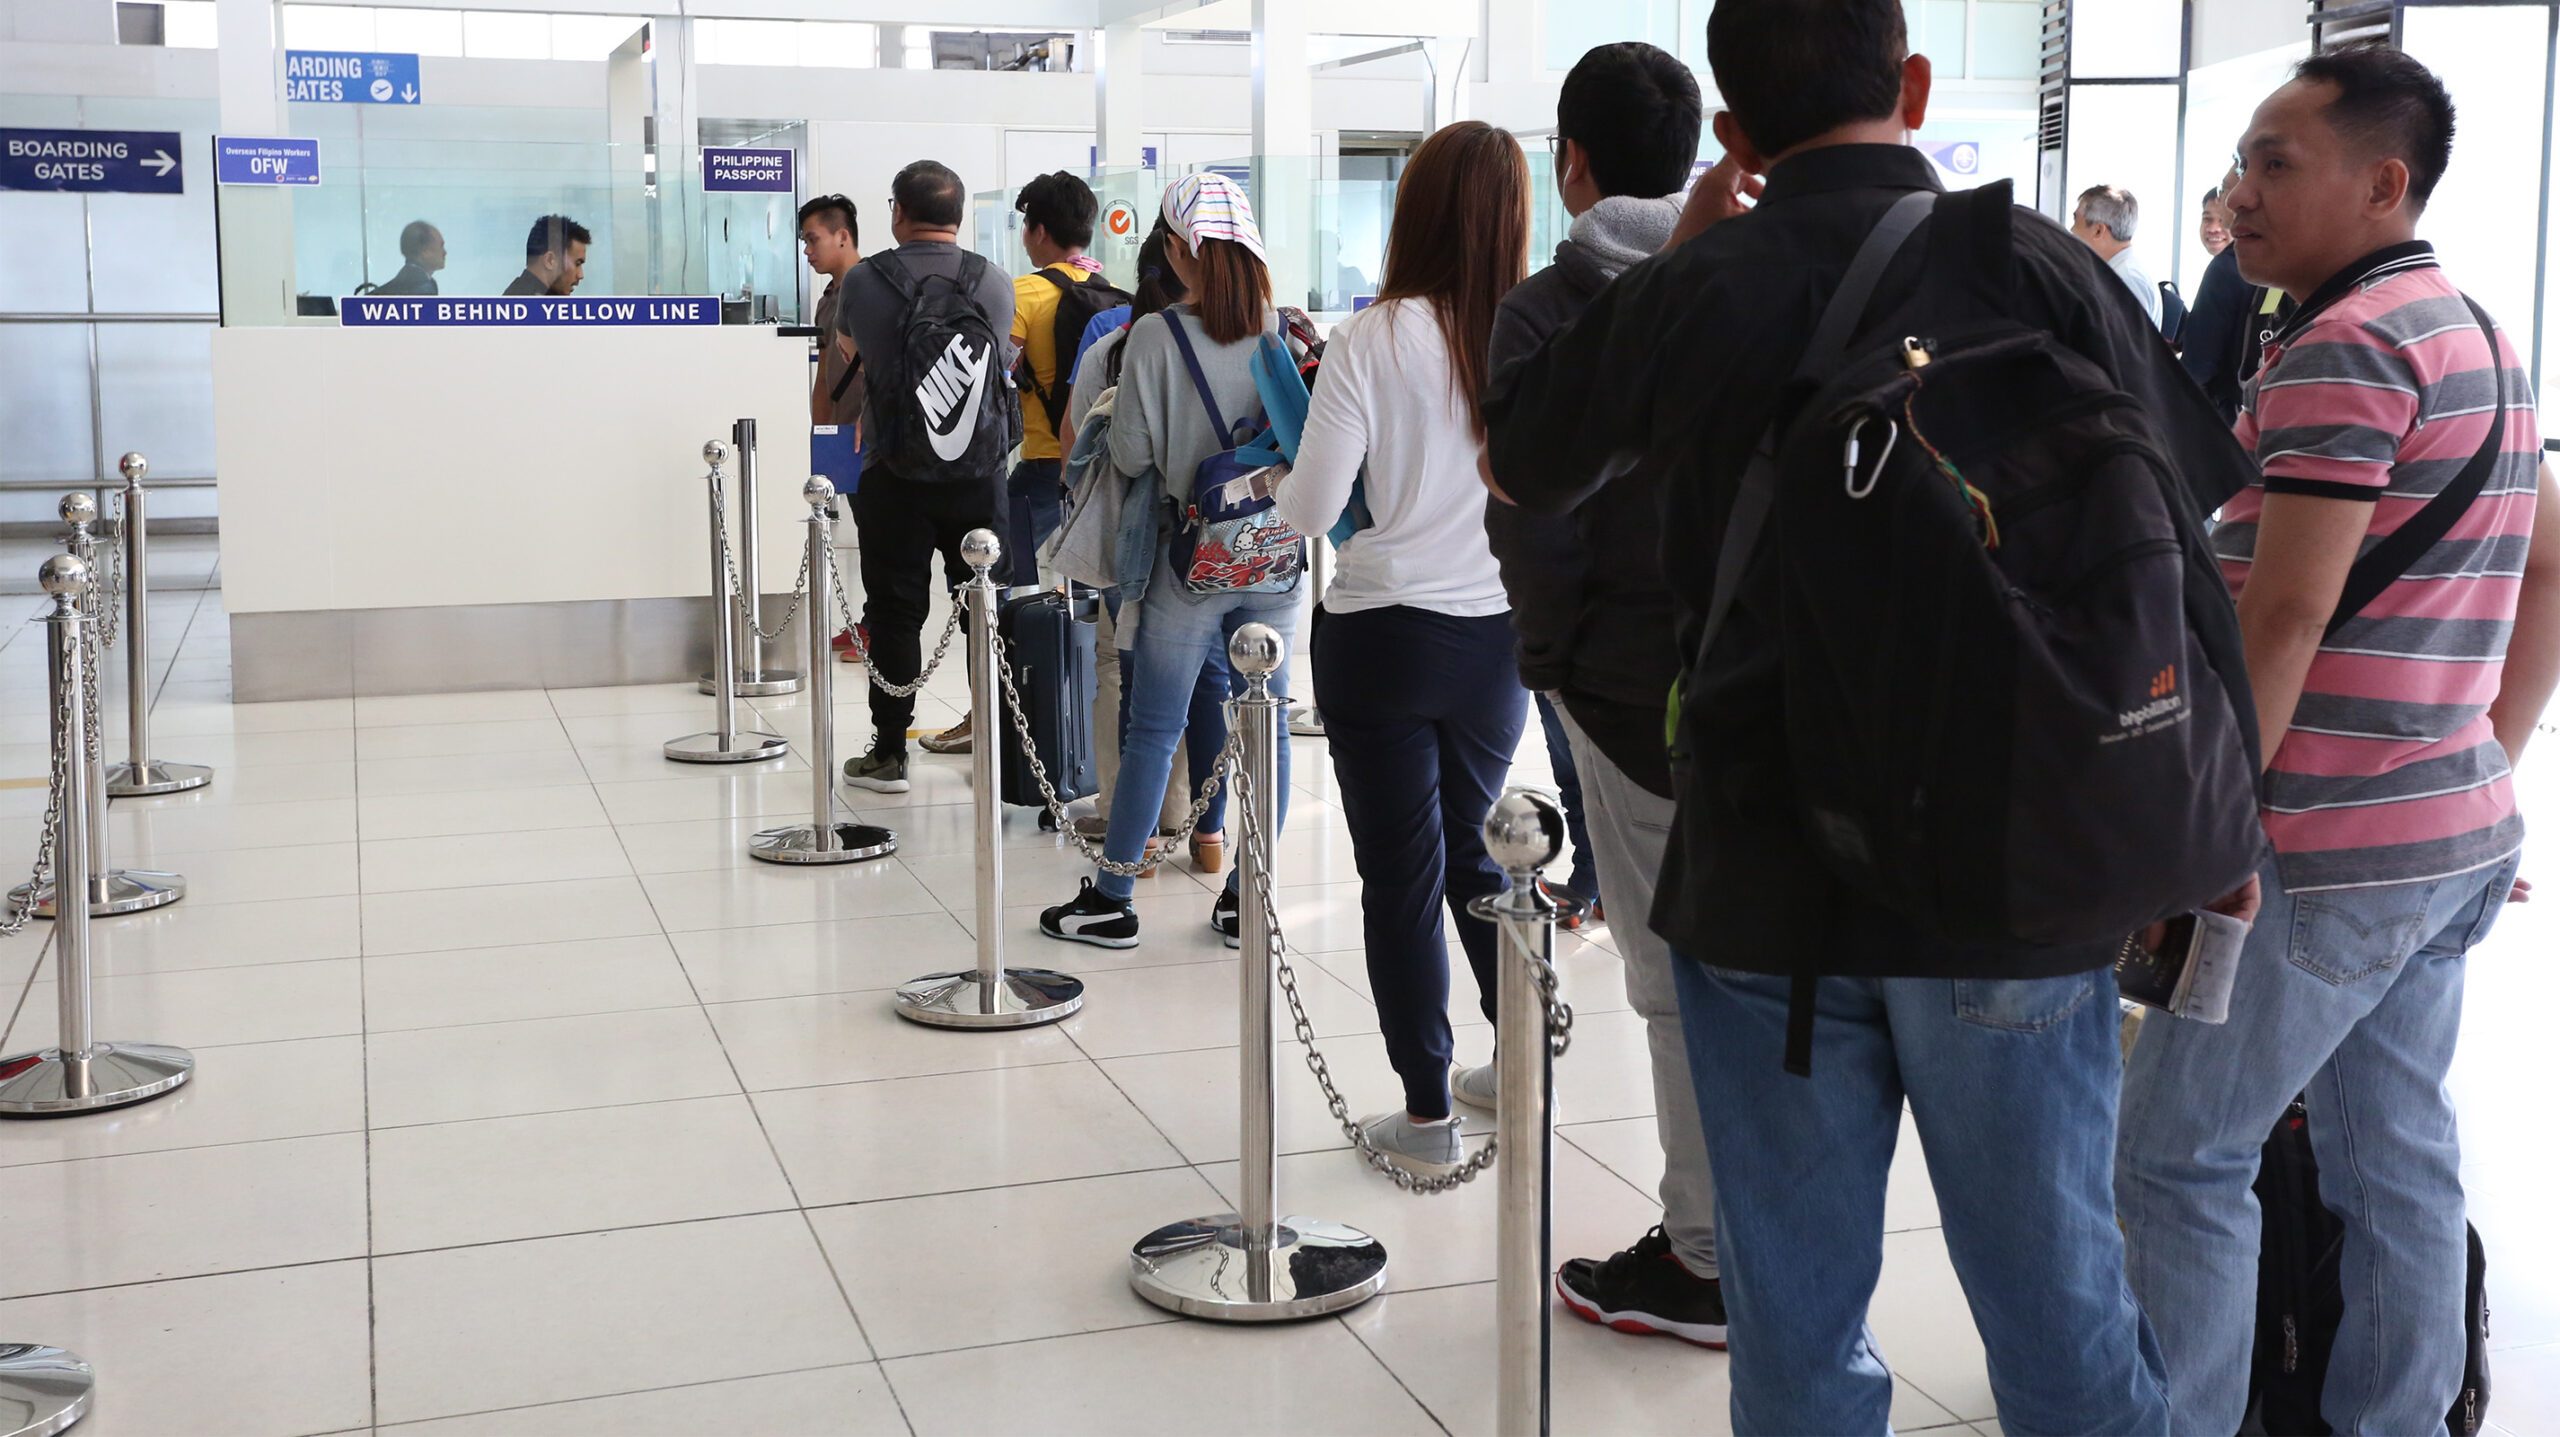 Diokno says soldiers can man airport immigration counters